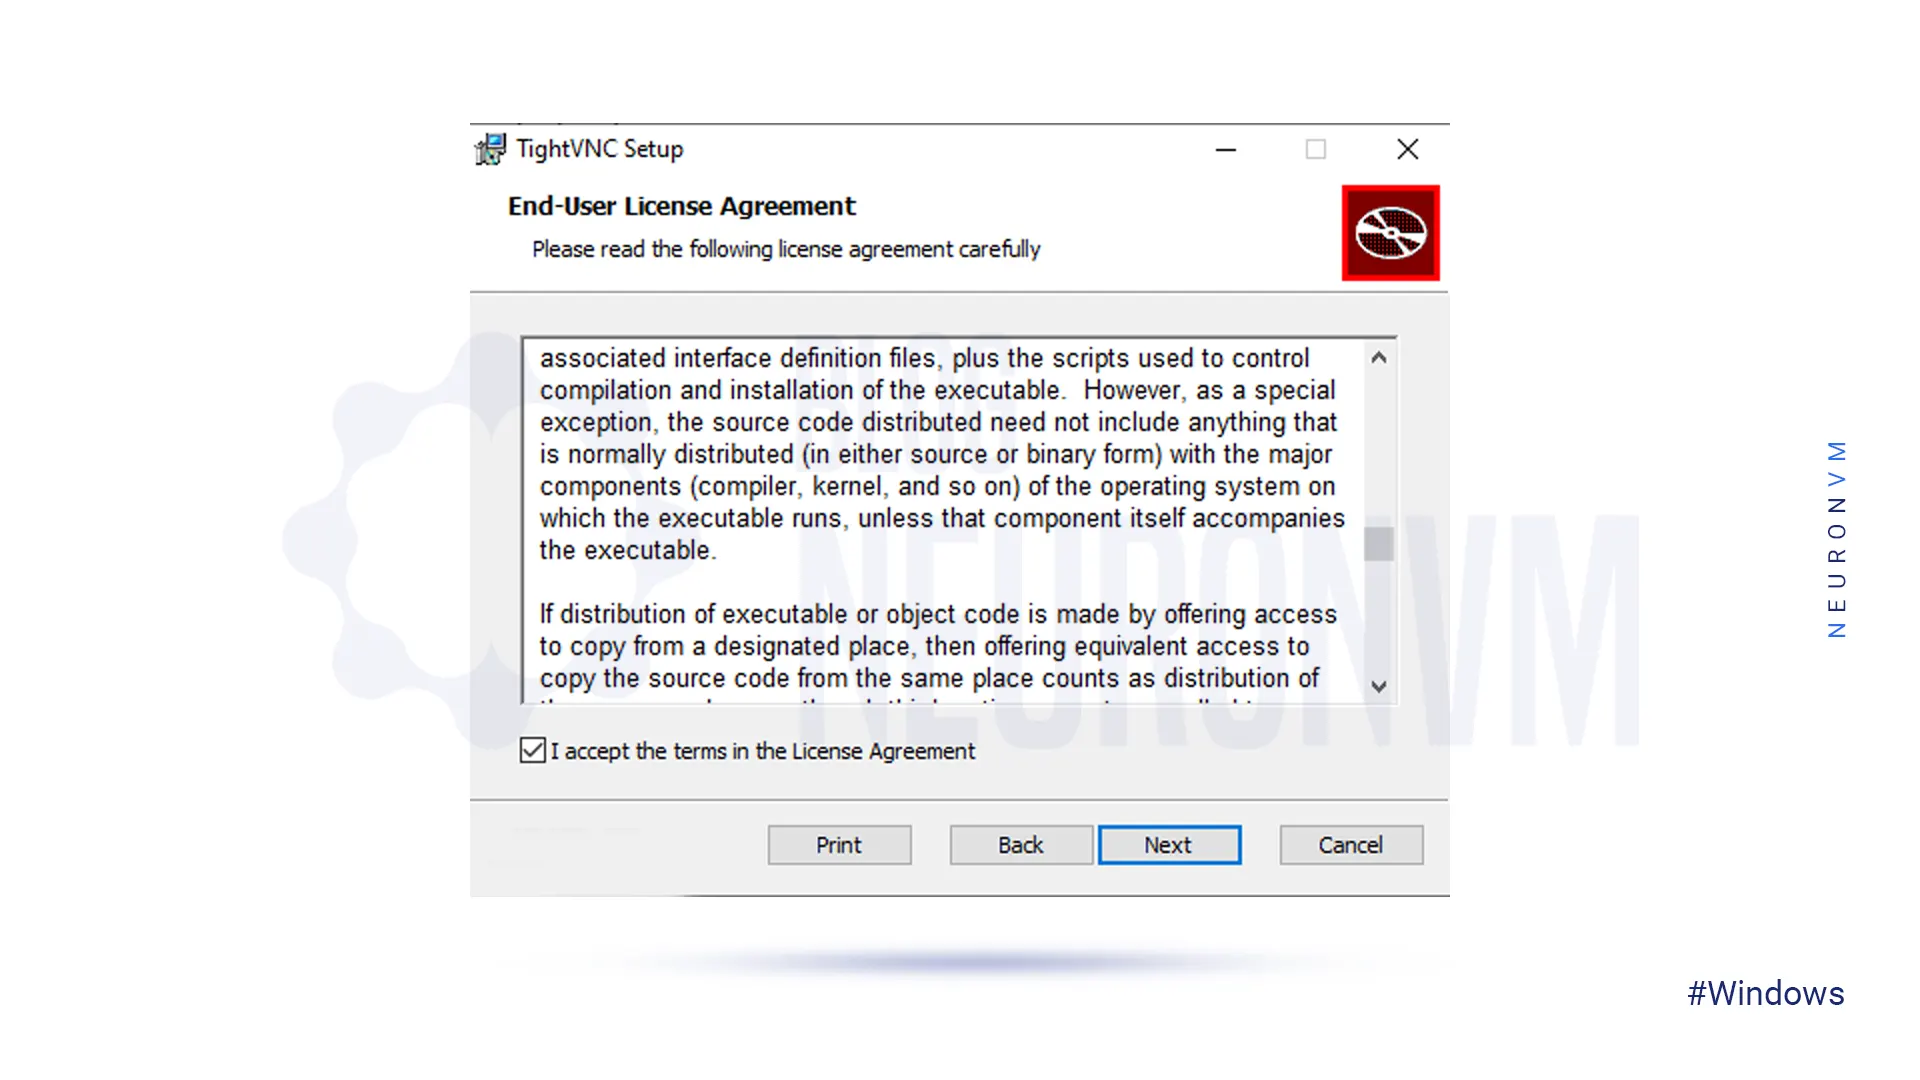 tightvnc license agreement